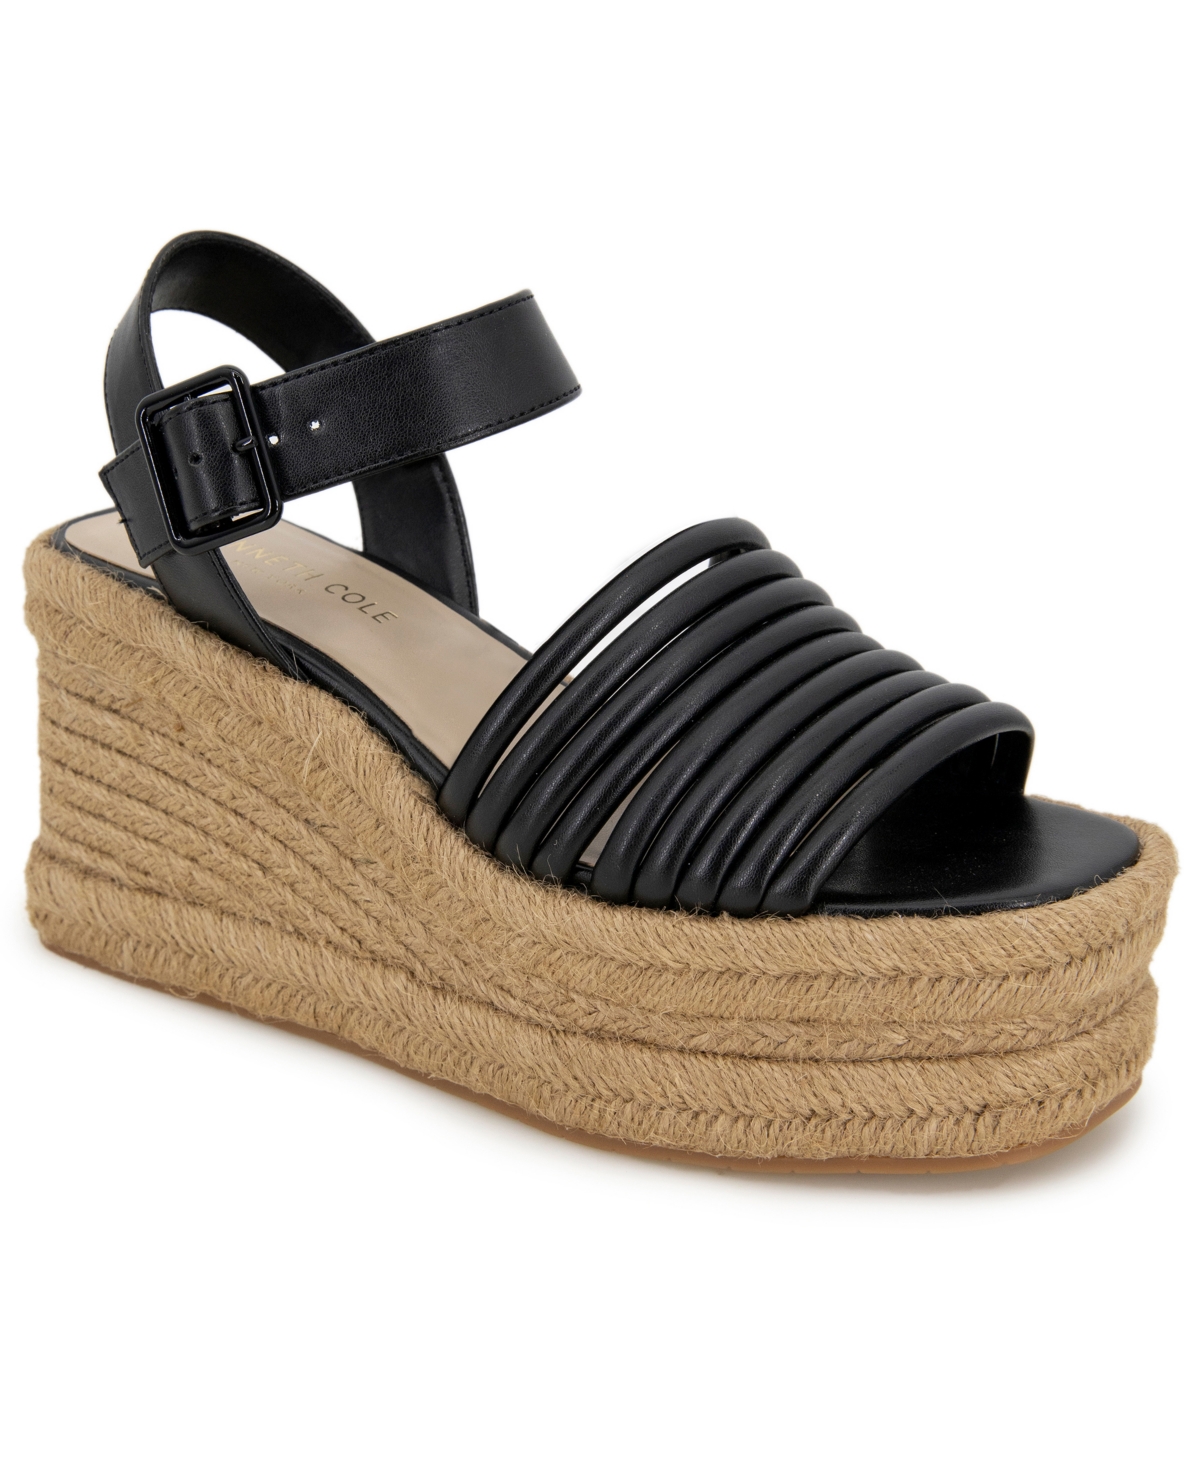 KENNETH COLE NEW YORK WOMEN'S SHELBY WEDGE SANDALS WOMEN'S SHOES